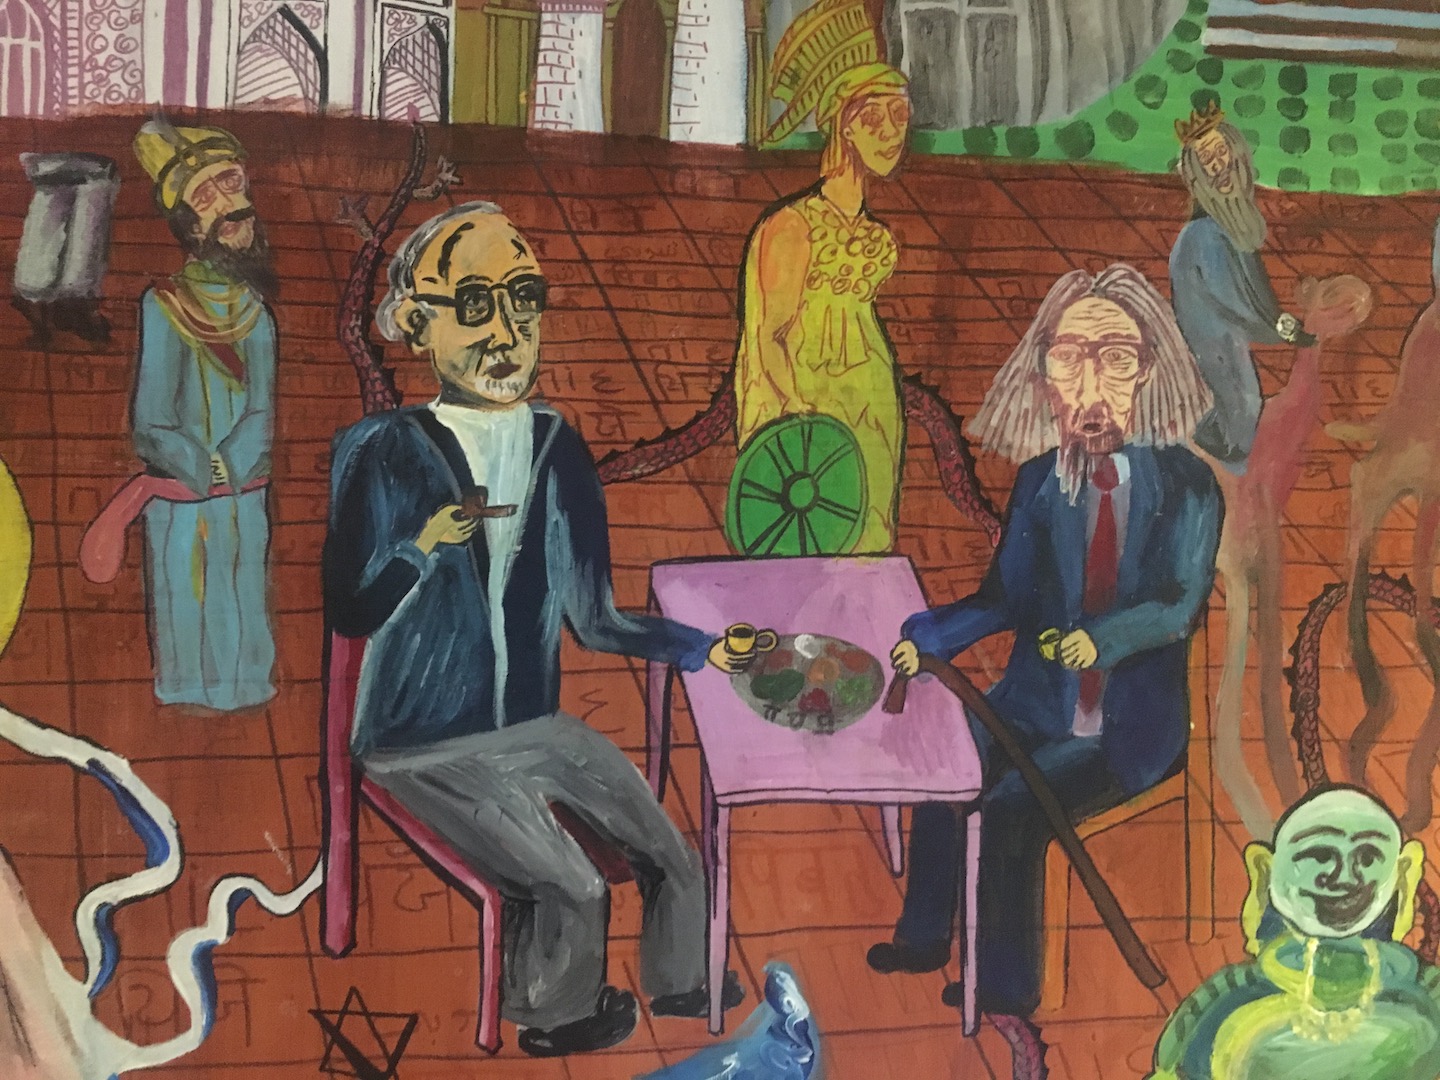 Smith and Eliade are pictured together in a mural at the Divinity School's coffee shop, Grounds of Being. The artist is Rita Biagioli (A.M. '11).